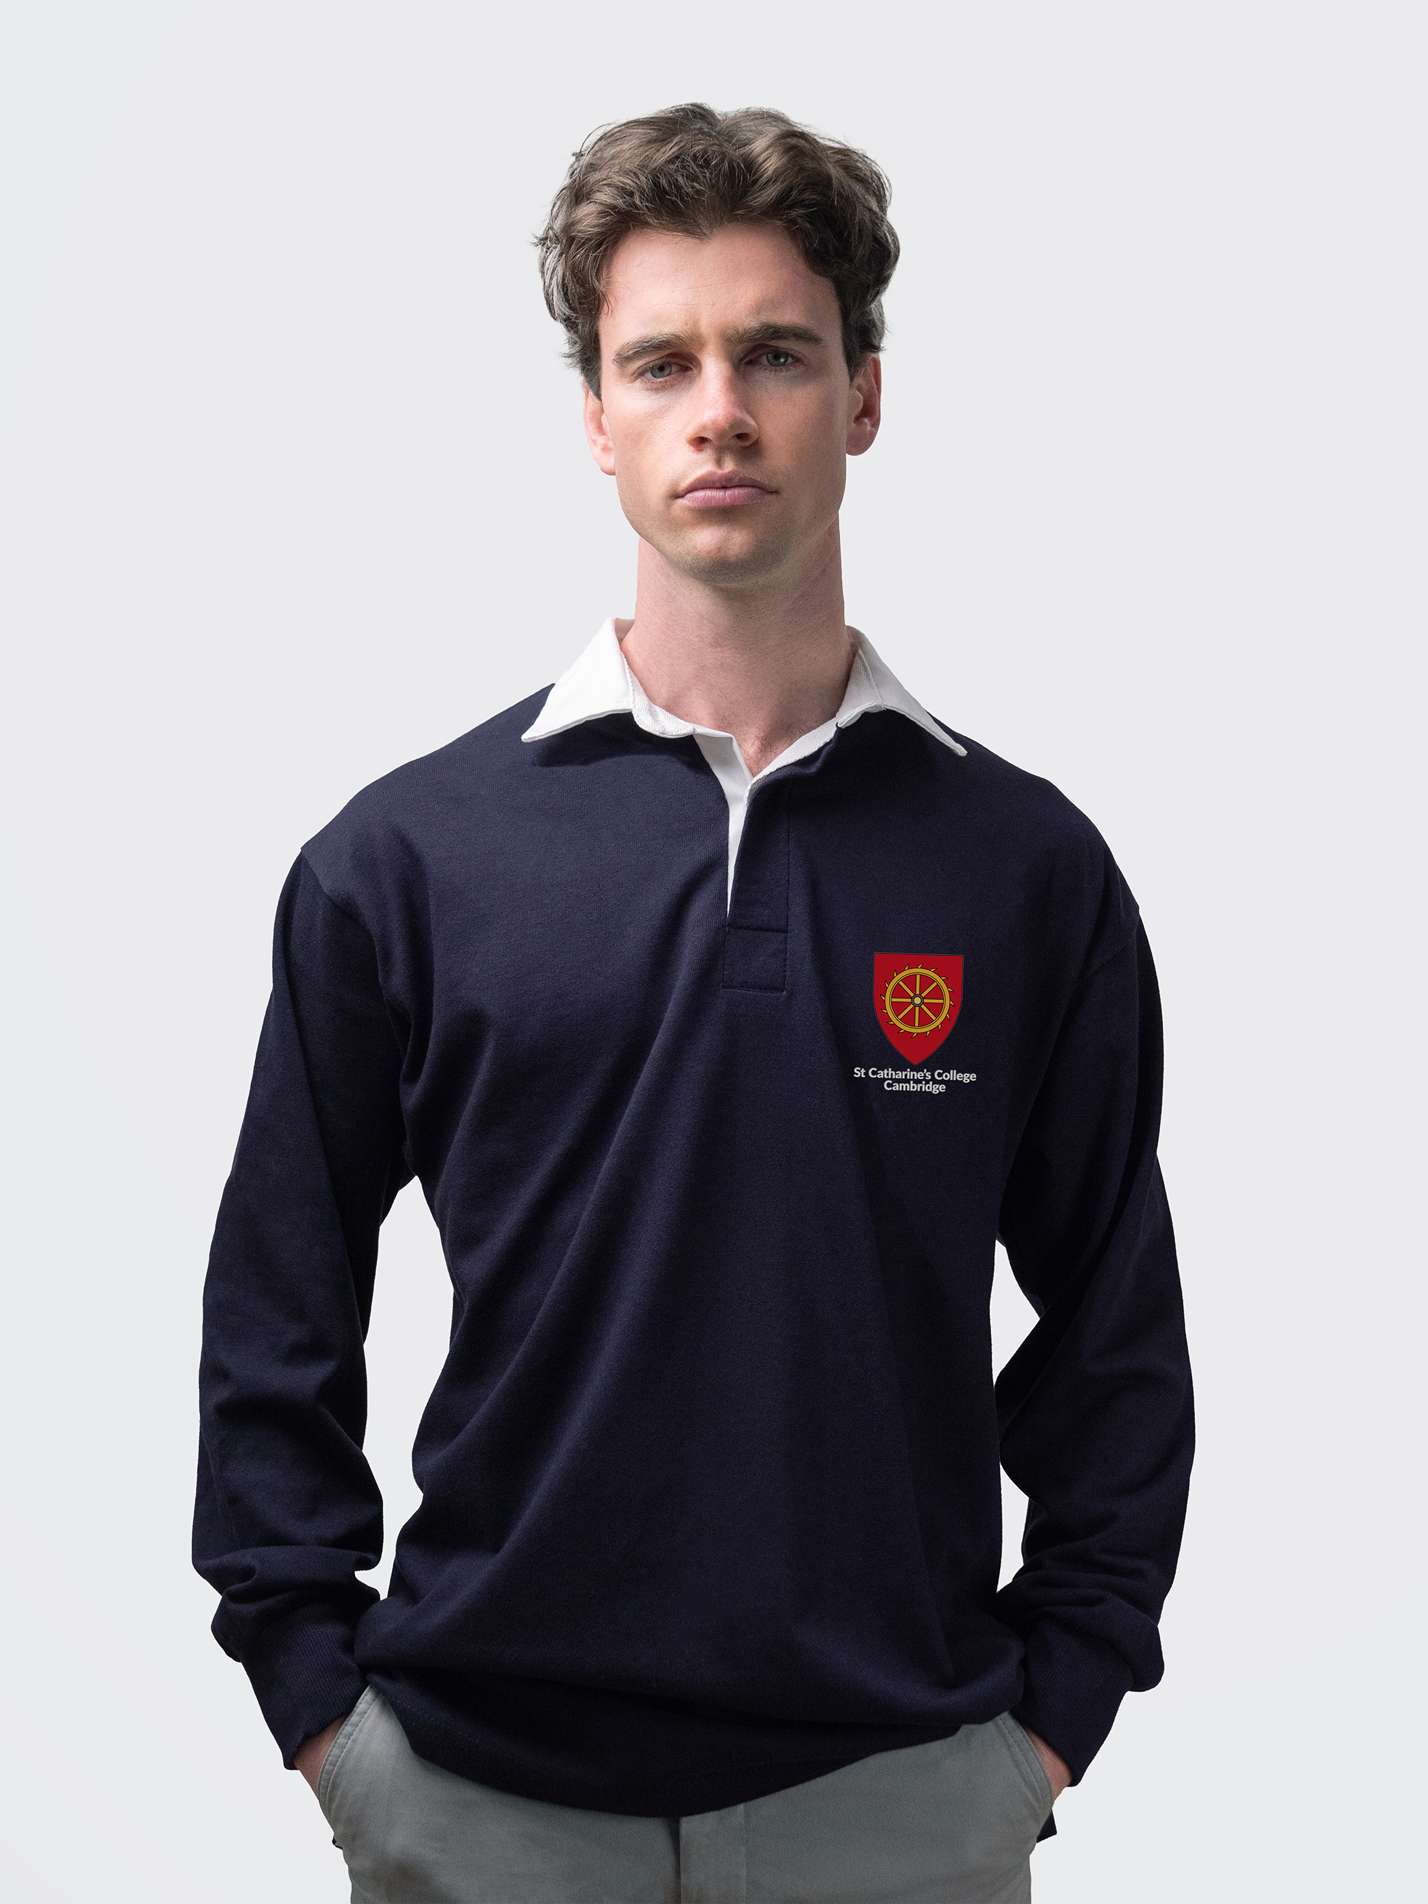 St Catharine's student wearing an embroidered mens rugby shirt in navy